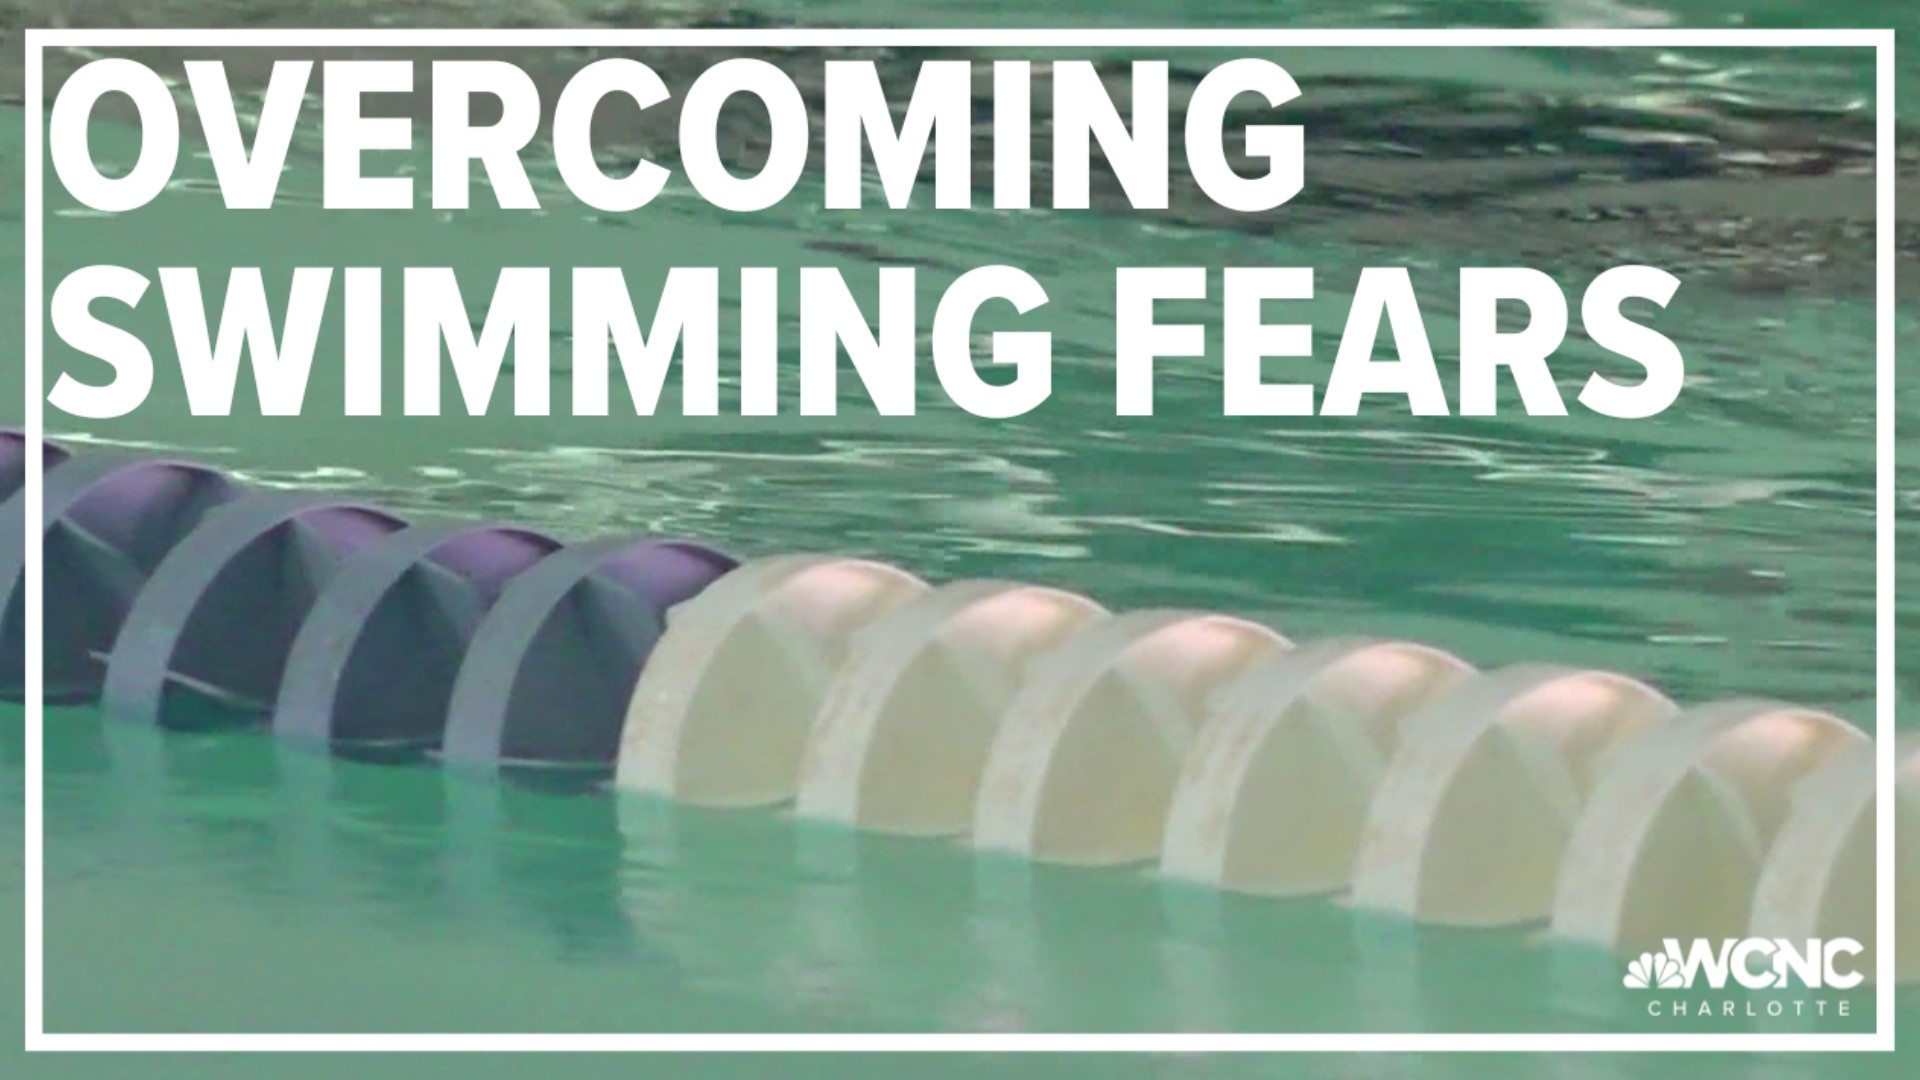 It could be the perfect time to learn how to swim at your local YMCA.